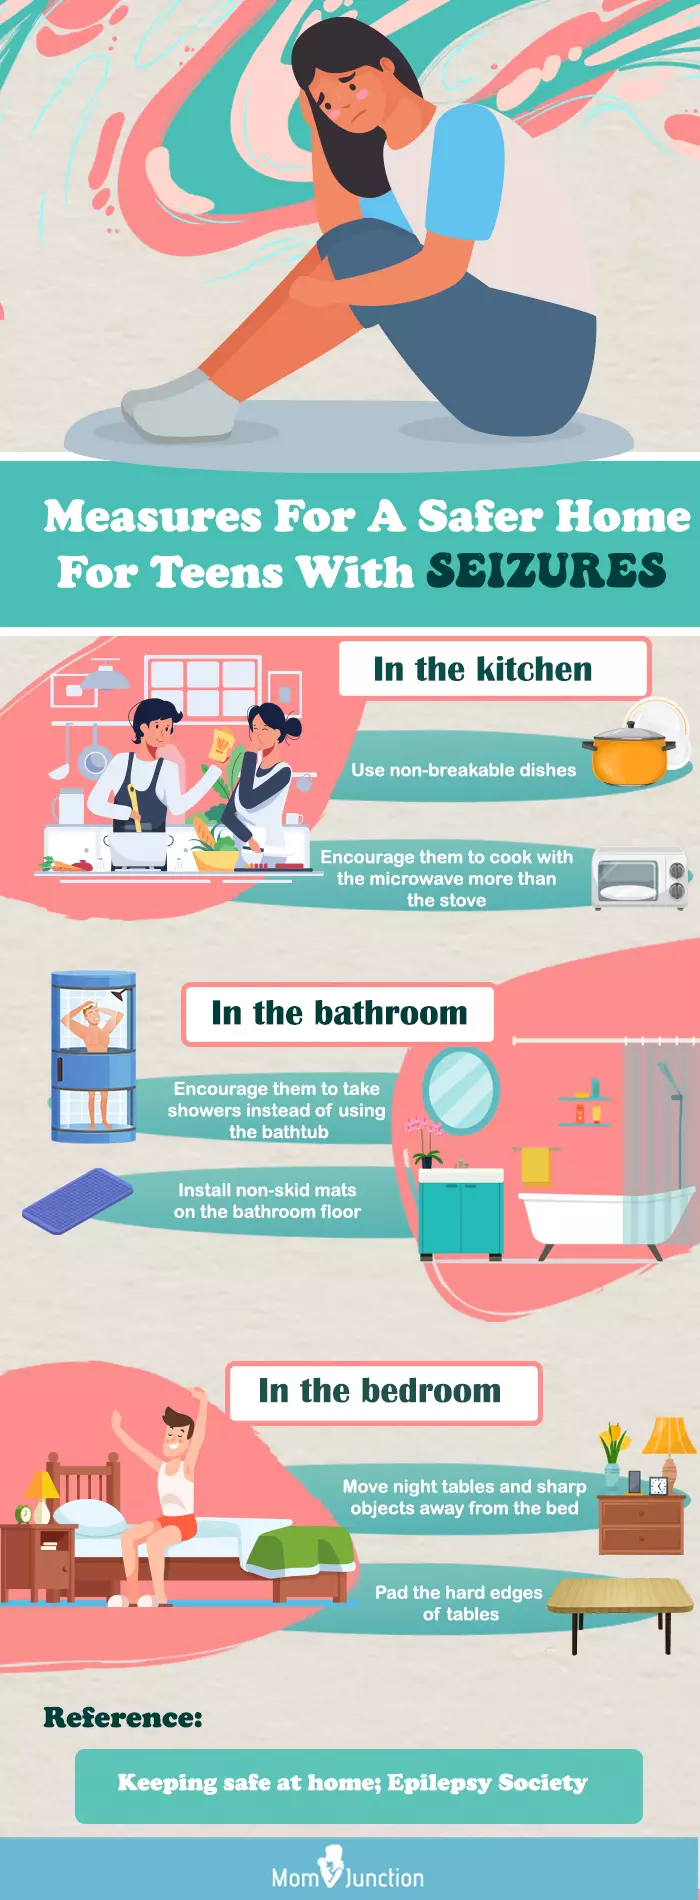 how to make your home safer for teens with seizures (infographic)